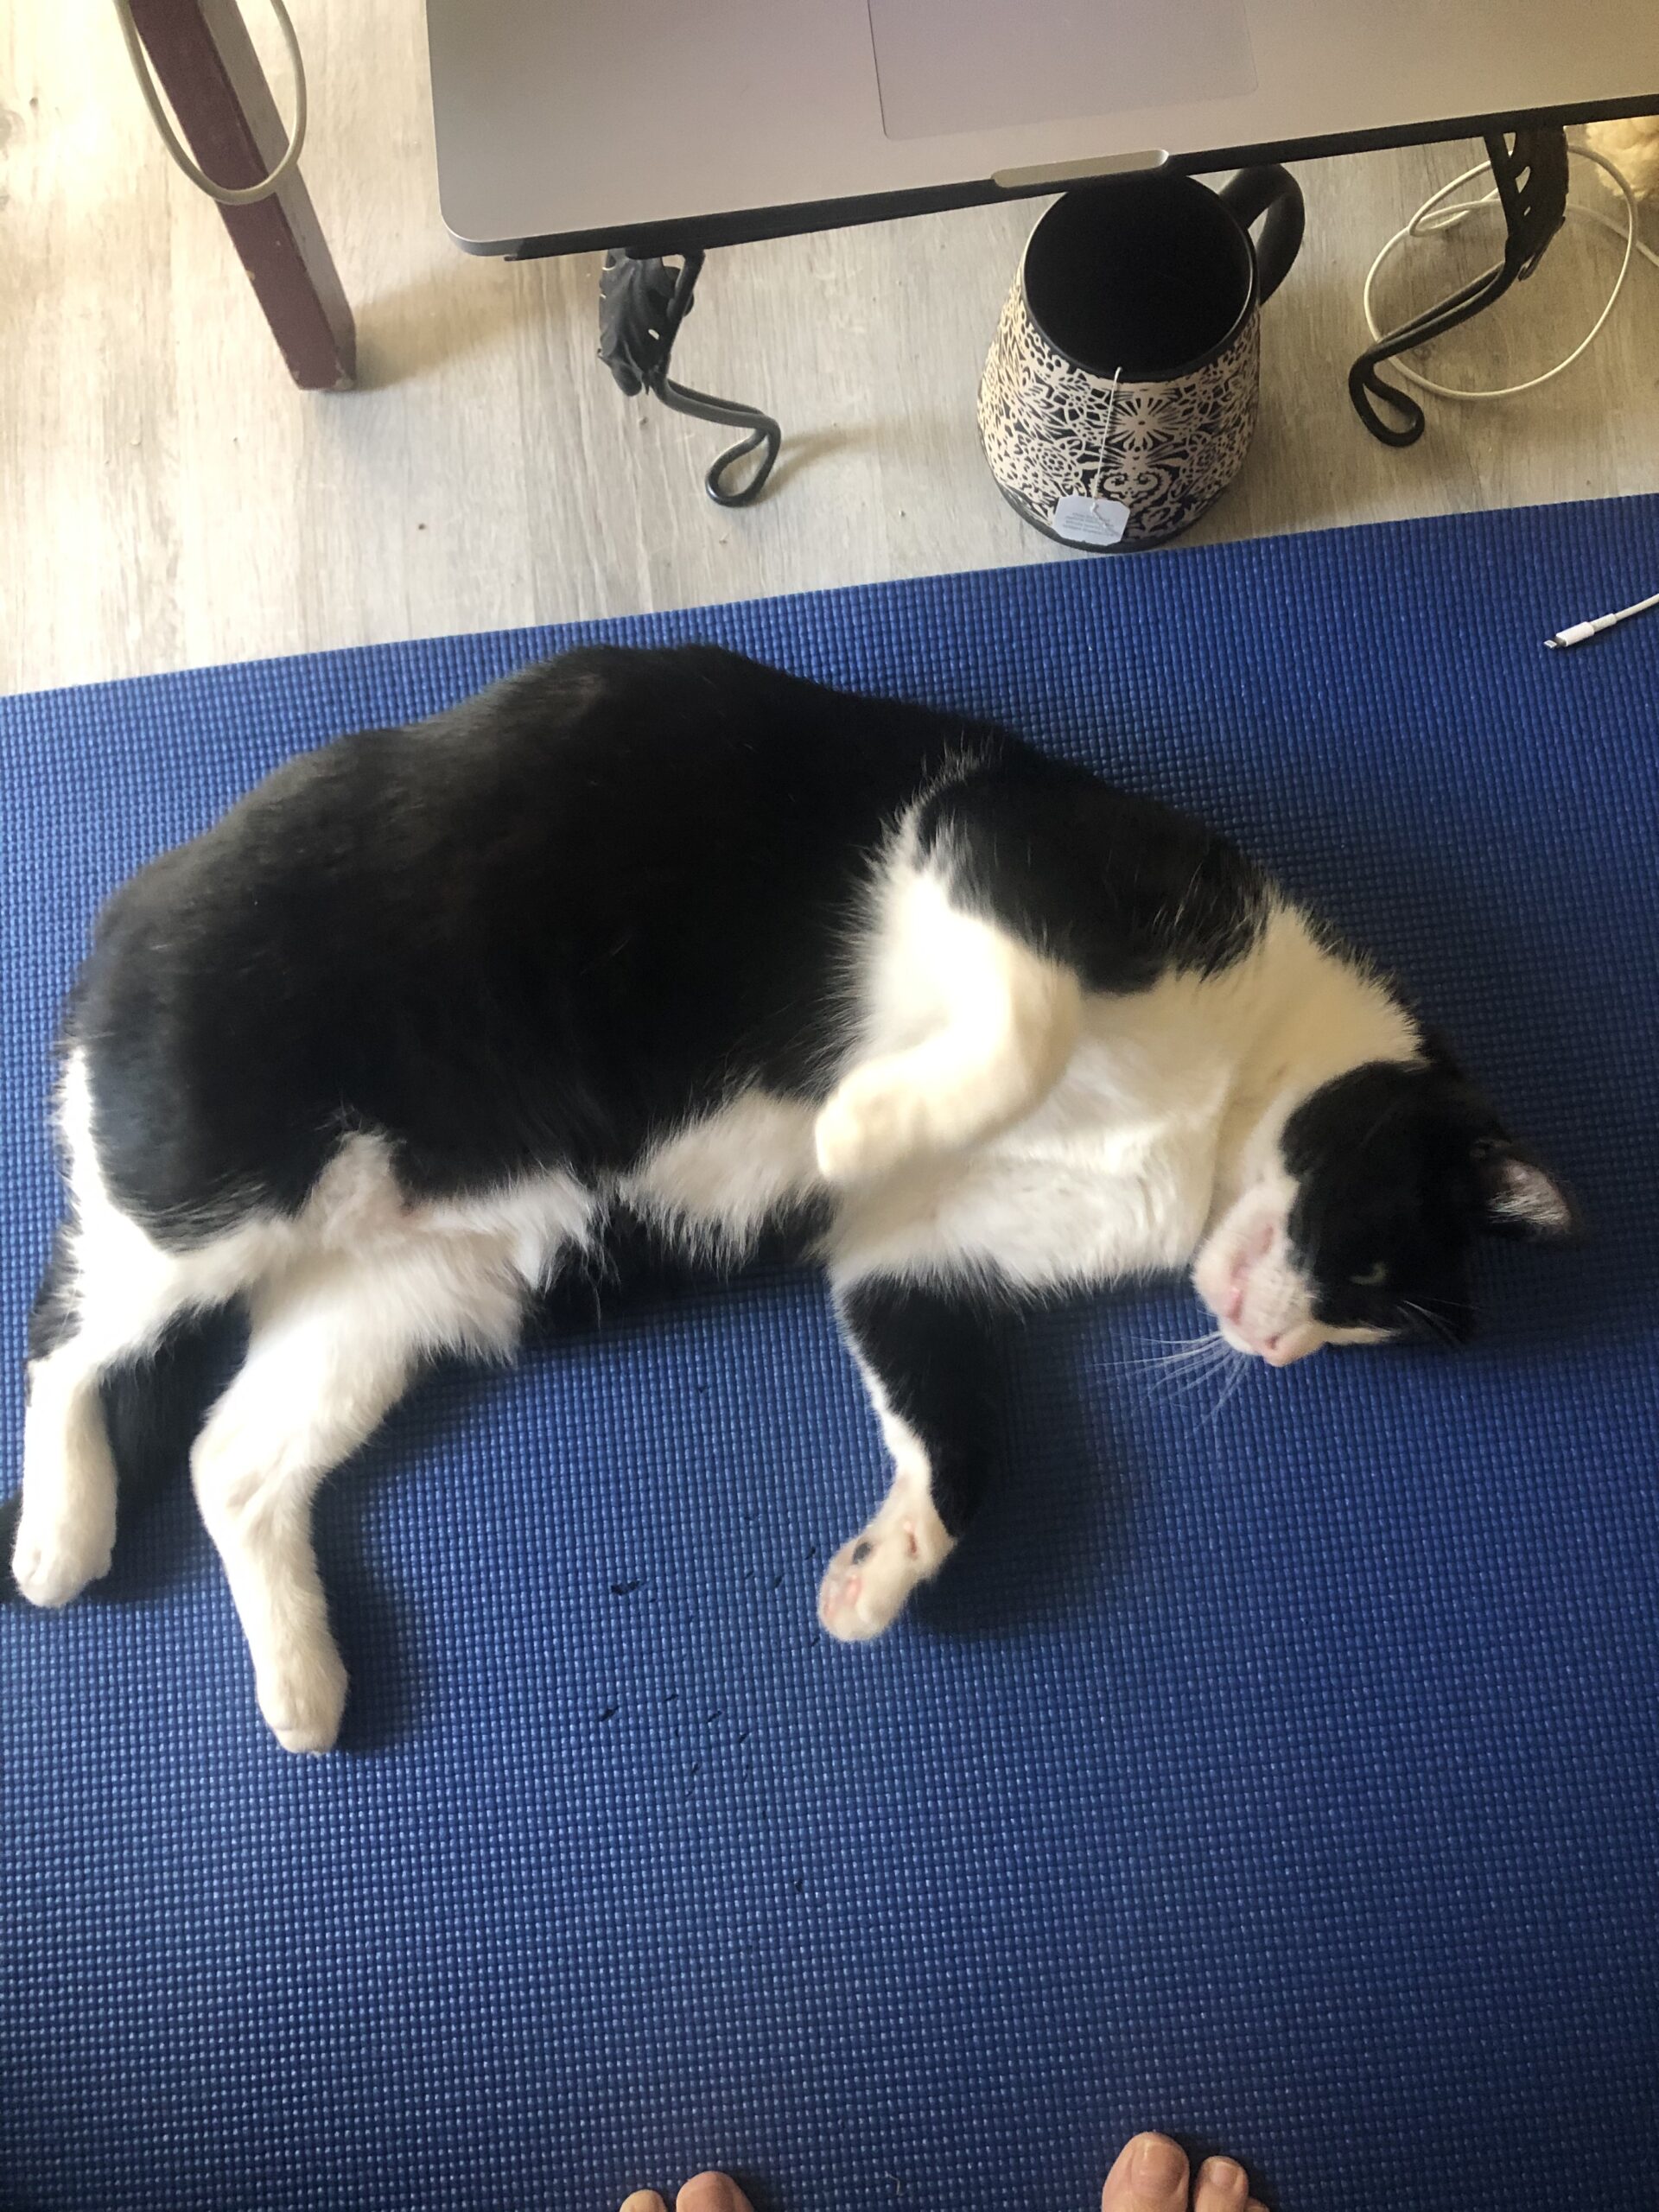 Pets are great companions during yoga